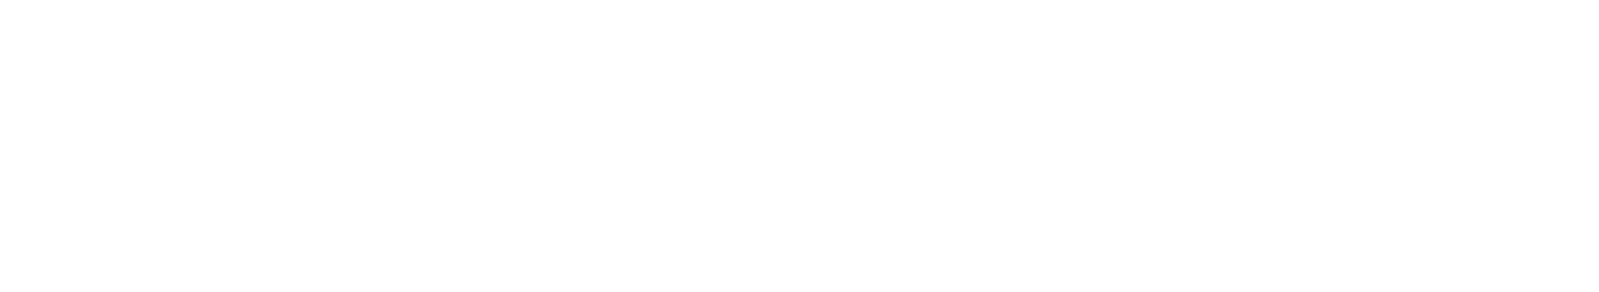 Petro Rio logo large for dark backgrounds (transparent PNG)